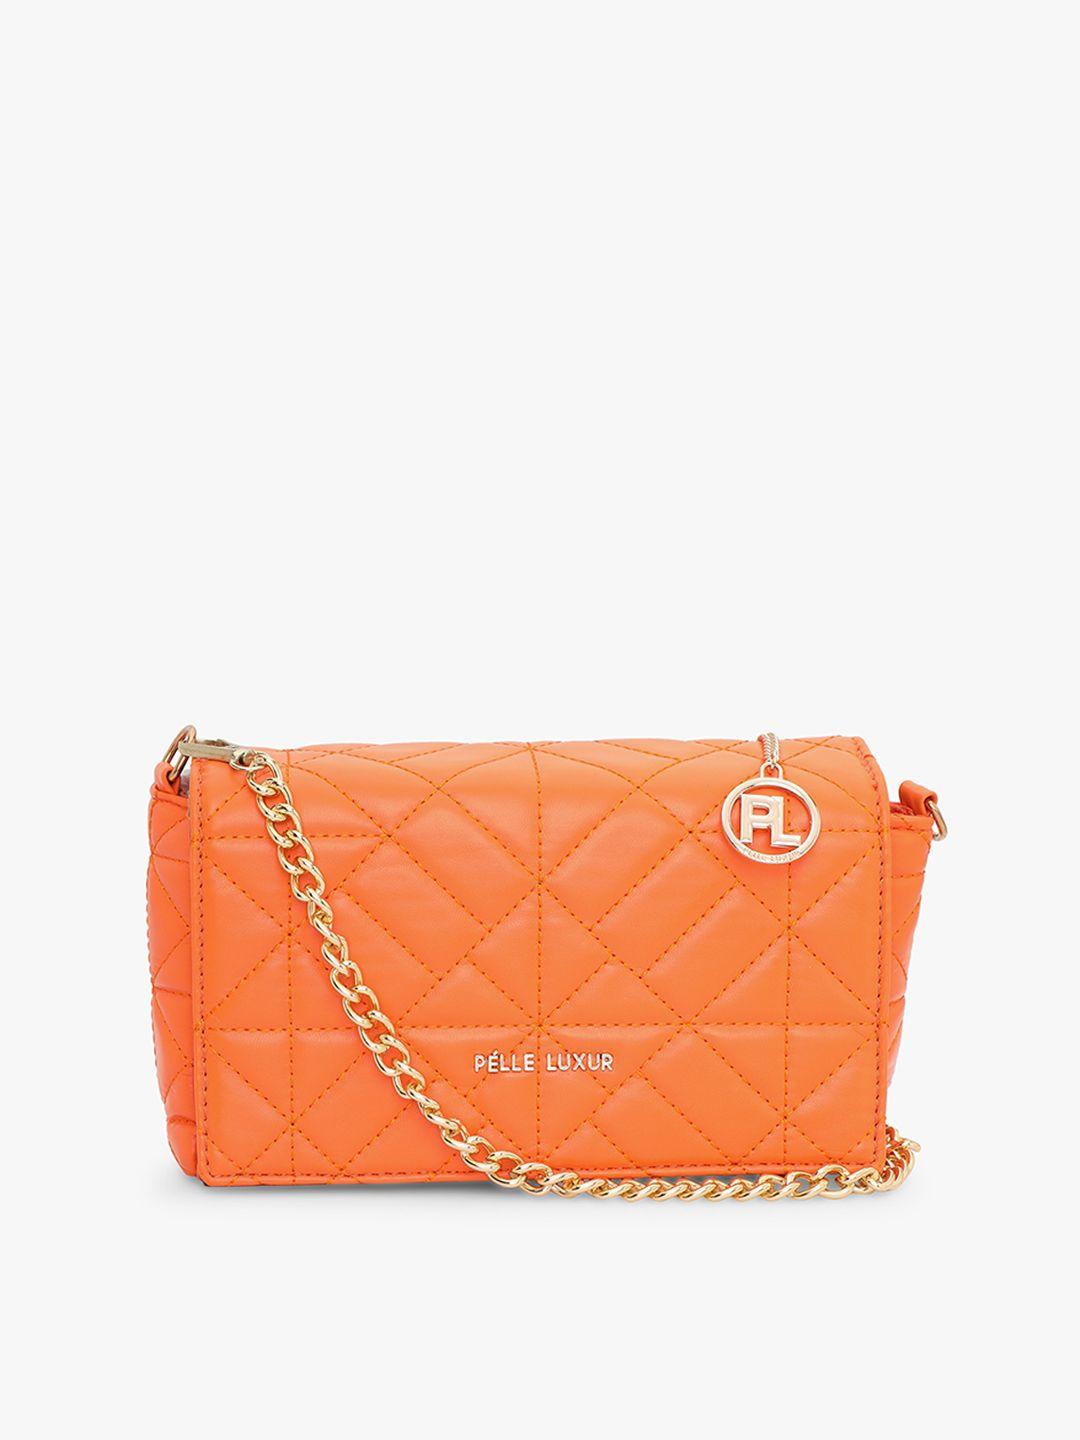 pelle luxur orange pu structured sling bag with quilted